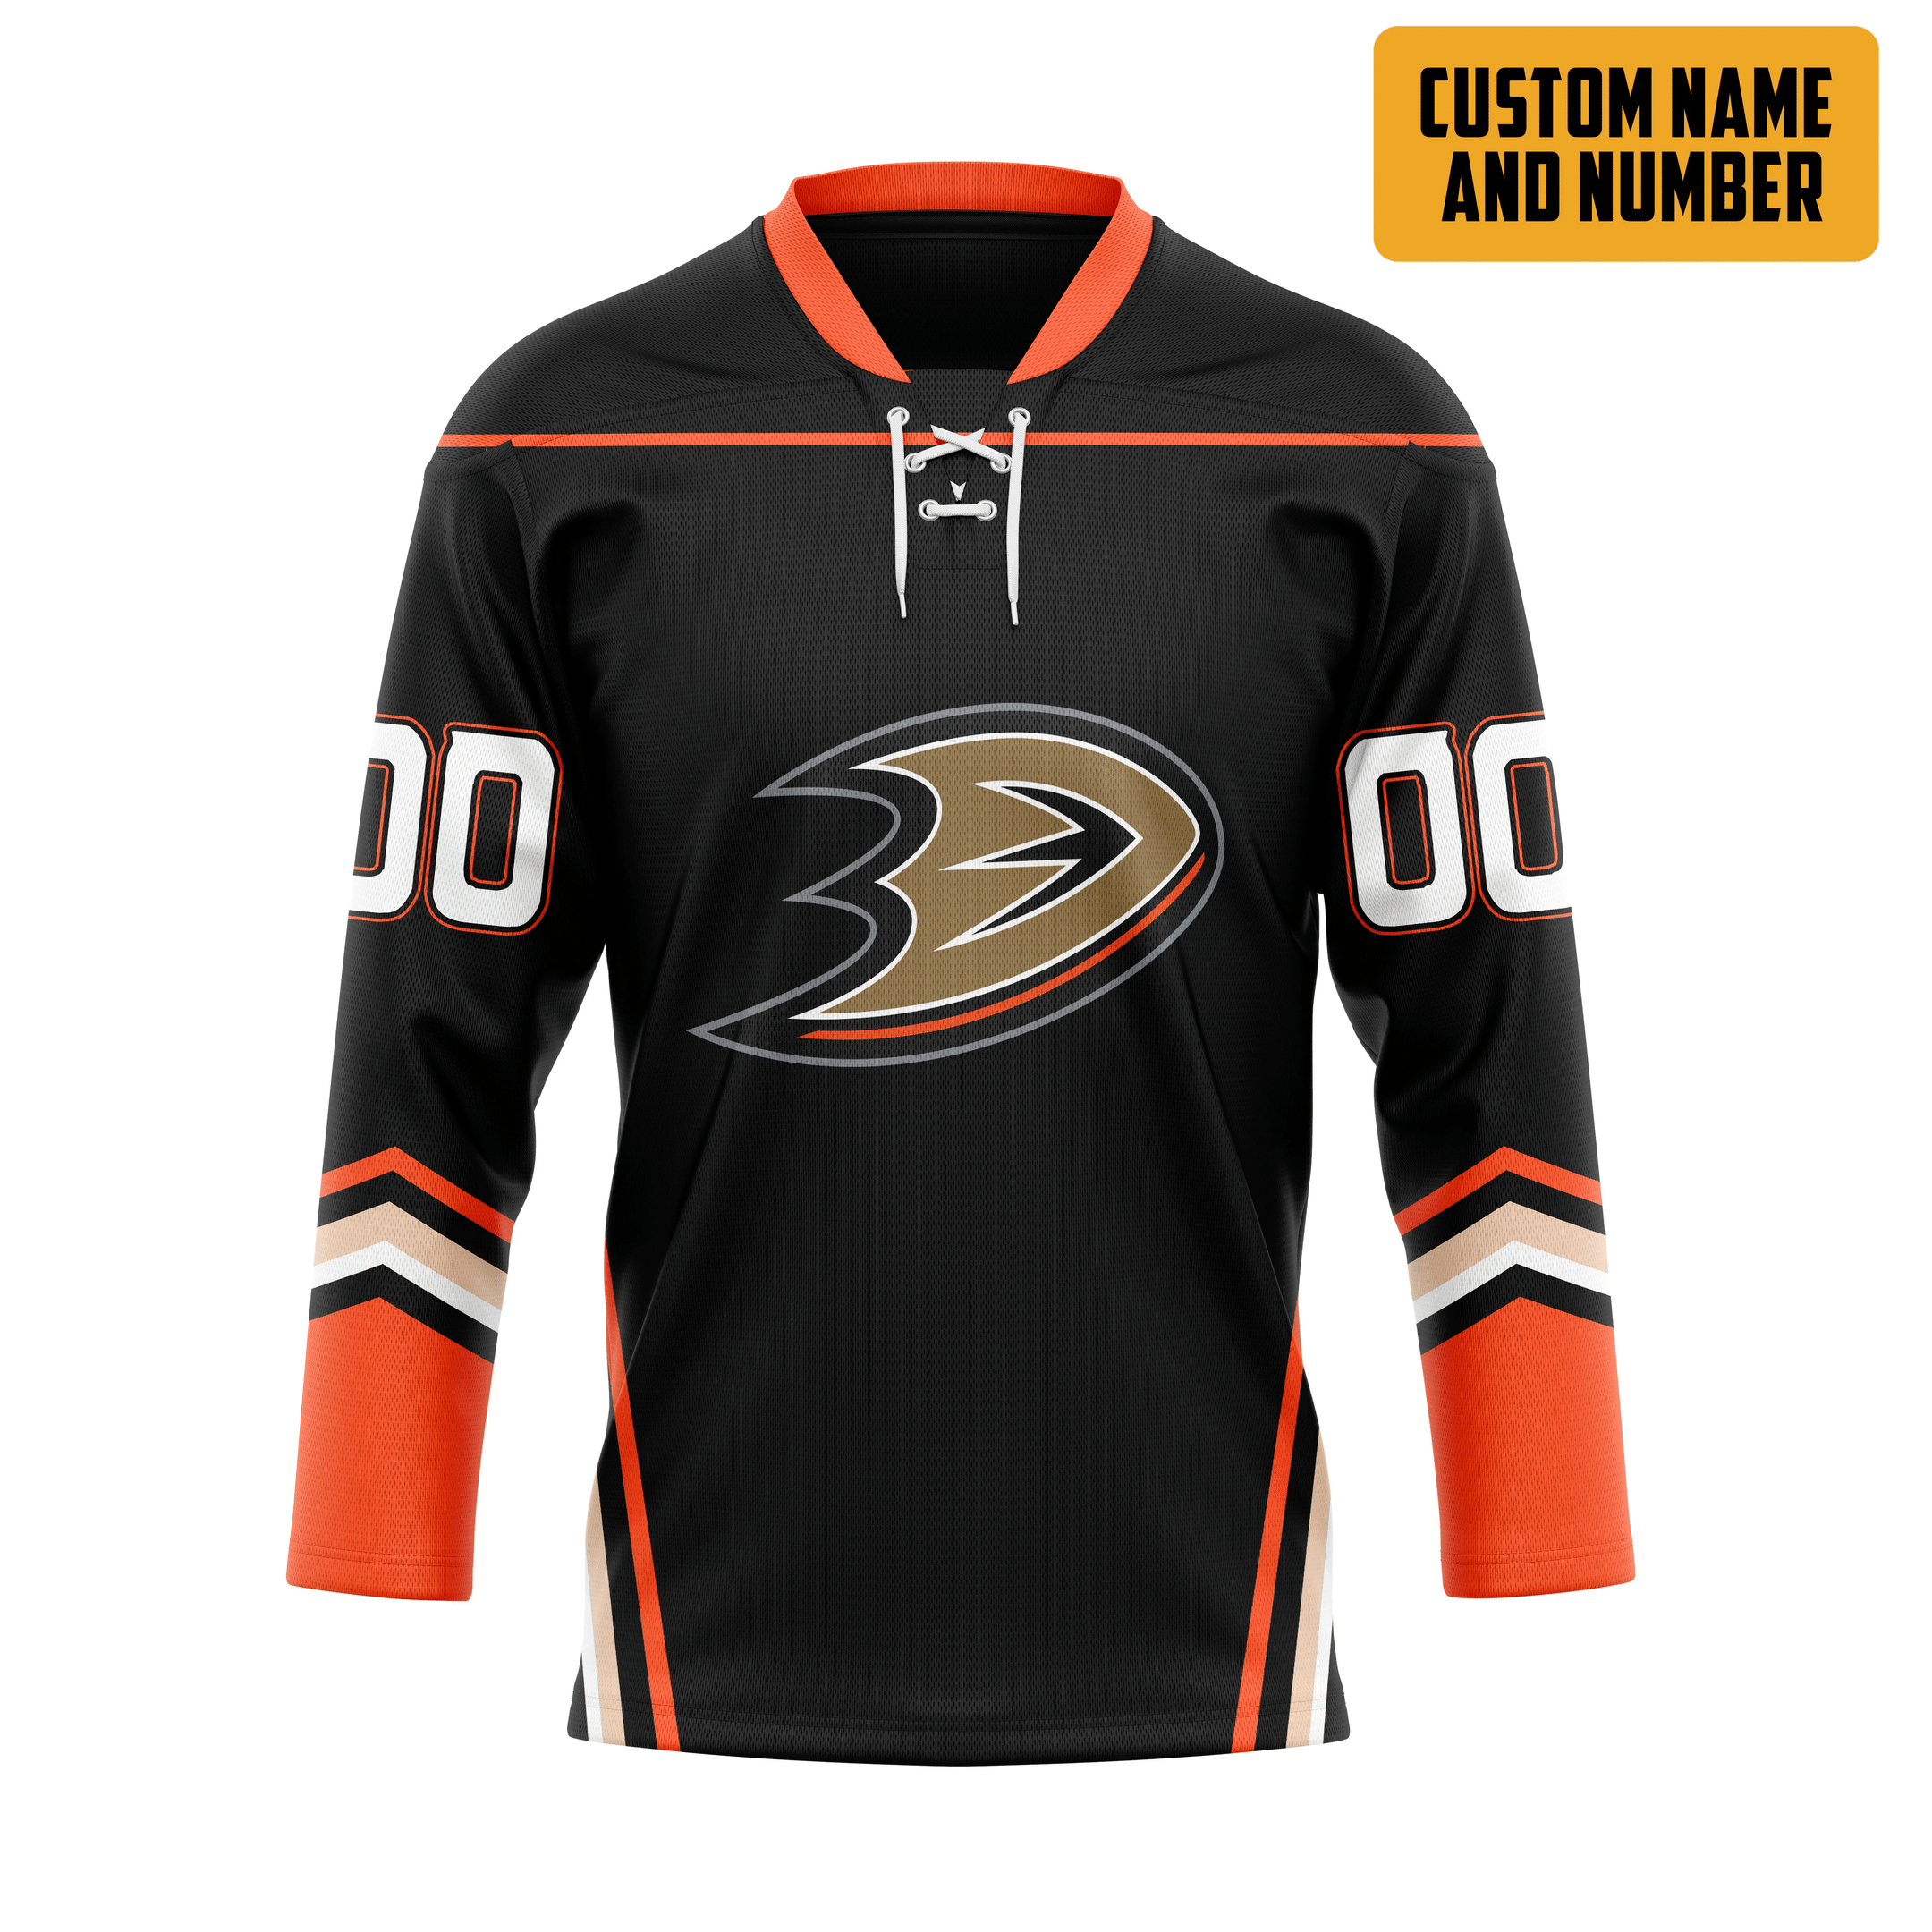 Choosing a hockey jersey is not as difficult as you think. 69